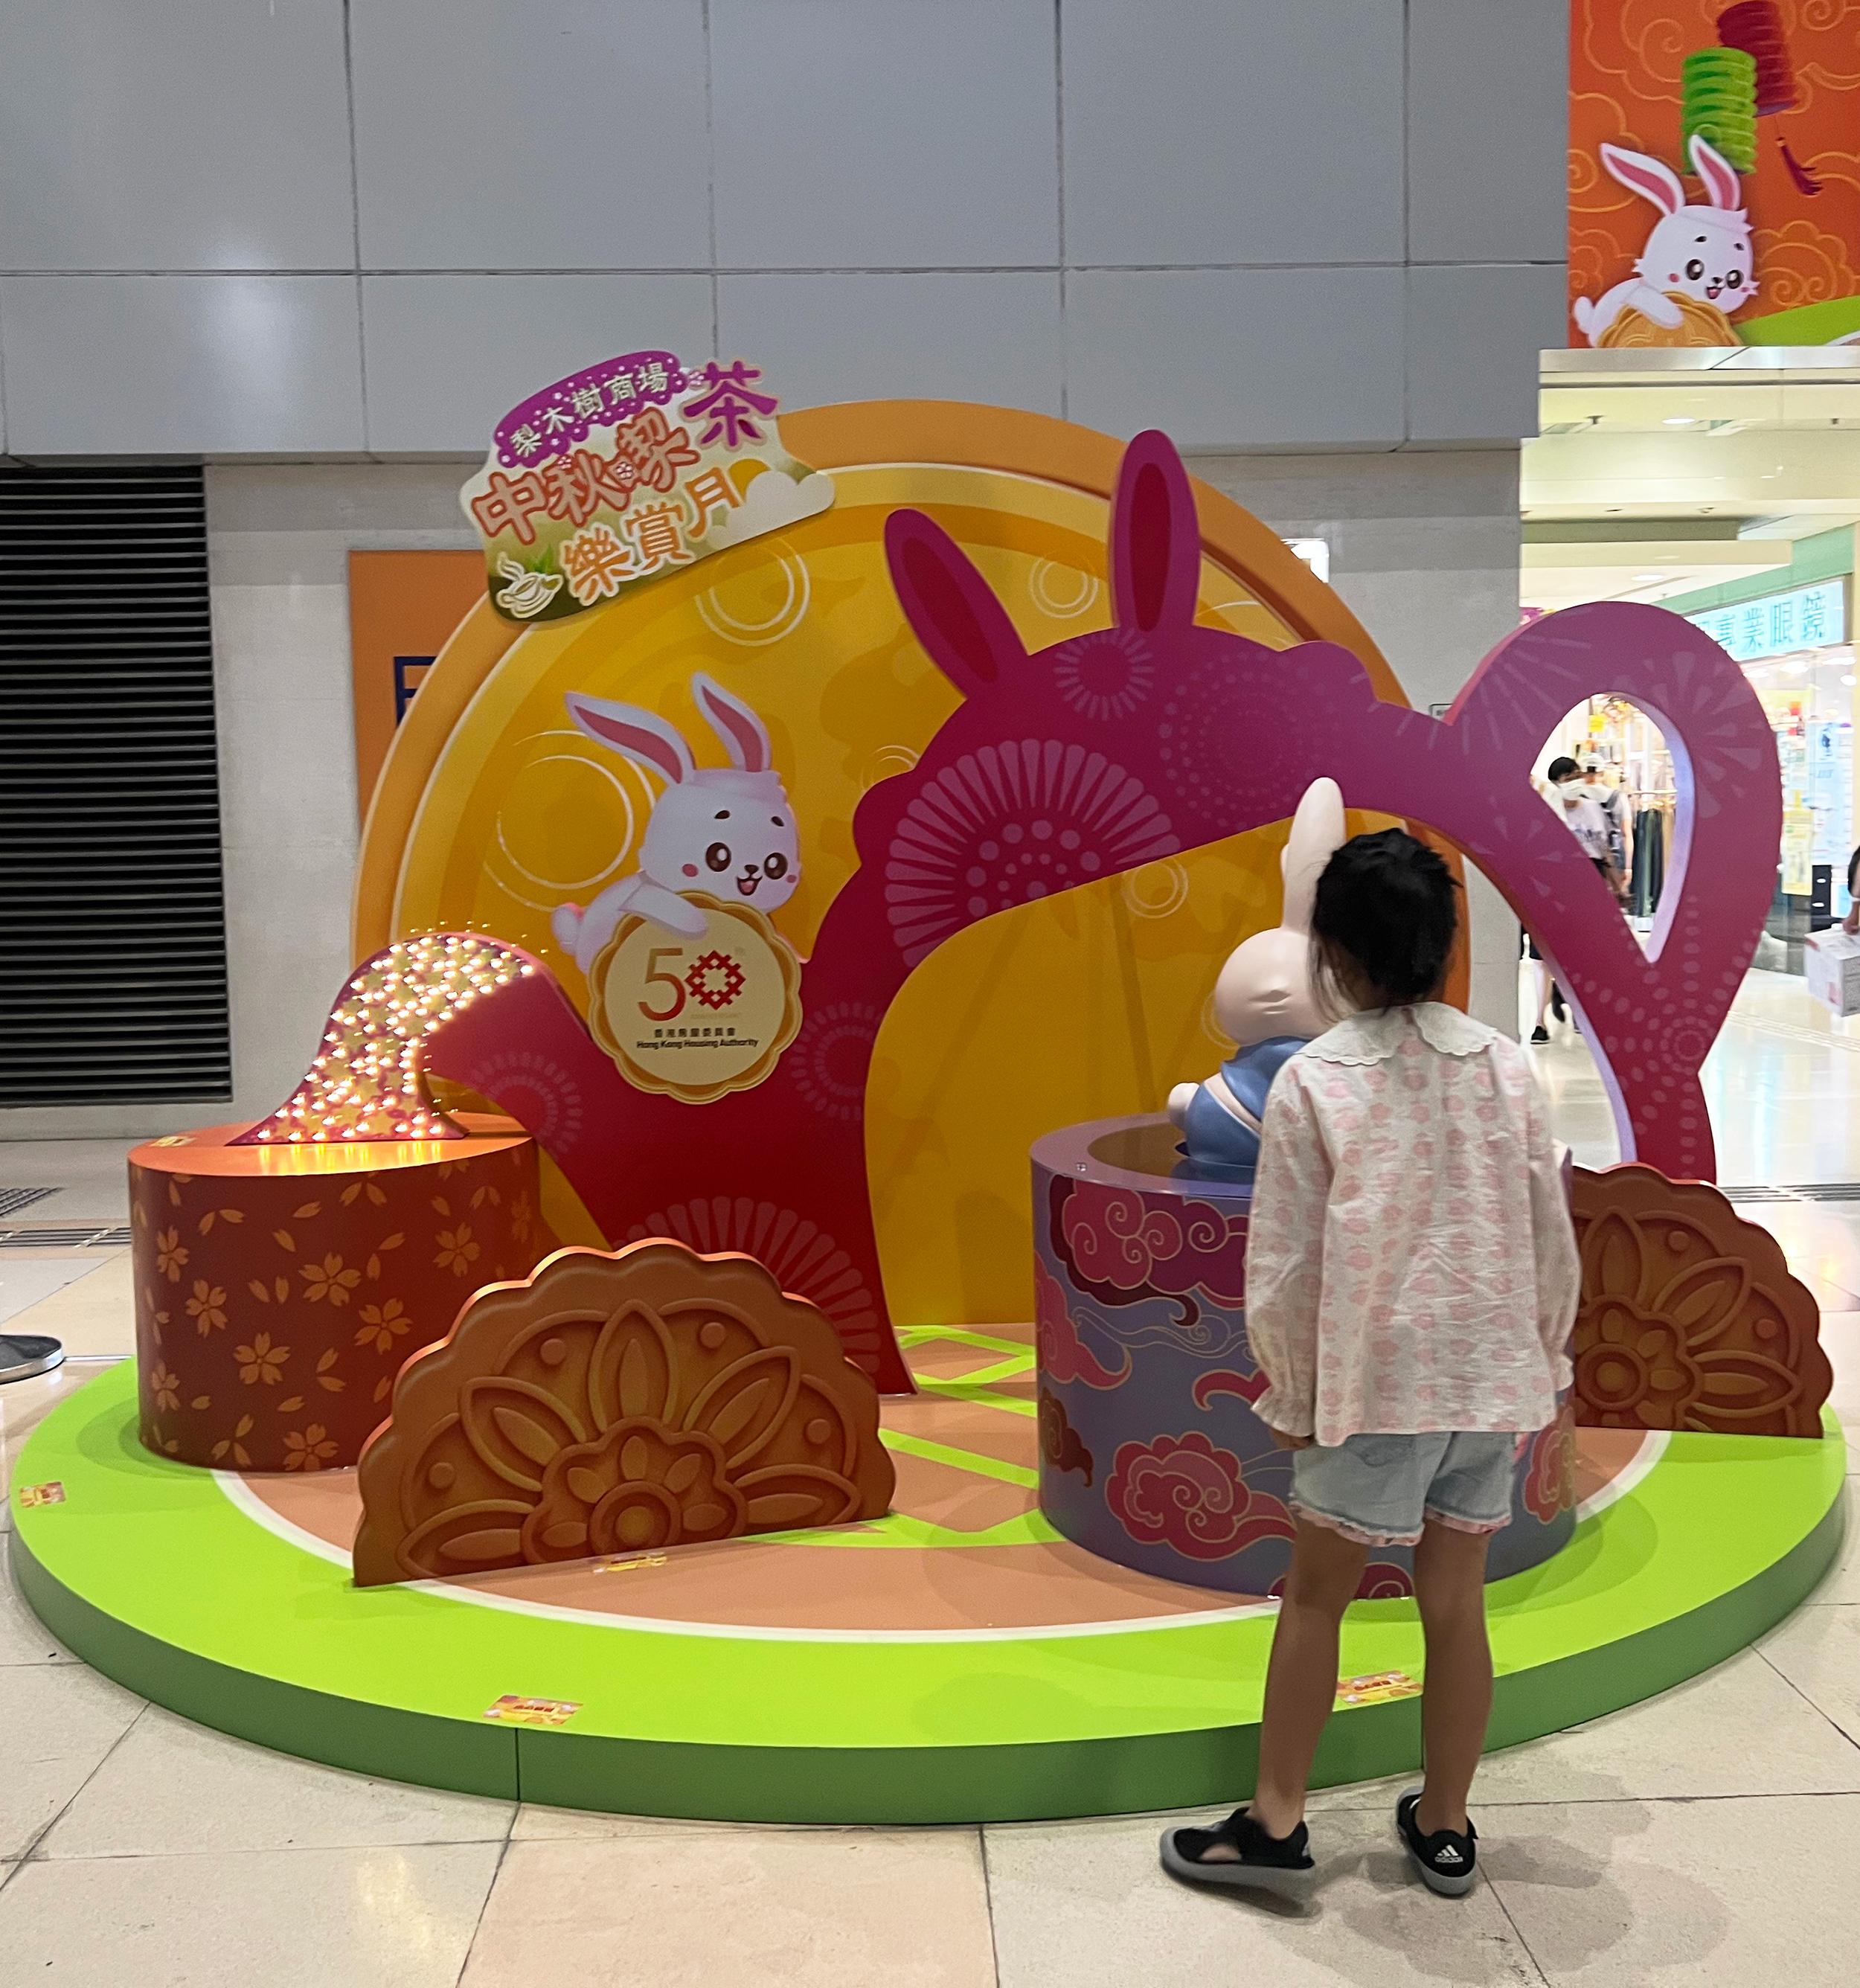 Hong Kong Housing Authority (HA) shopping centres are joining the Night Vibes Hong Kong campaign to hold promotion activities for celebration of the Mid-Autumn Festival and National Day. Photo shows decorations at the HA's Lei Muk Shue Shopping Centre, Kwai Chung.